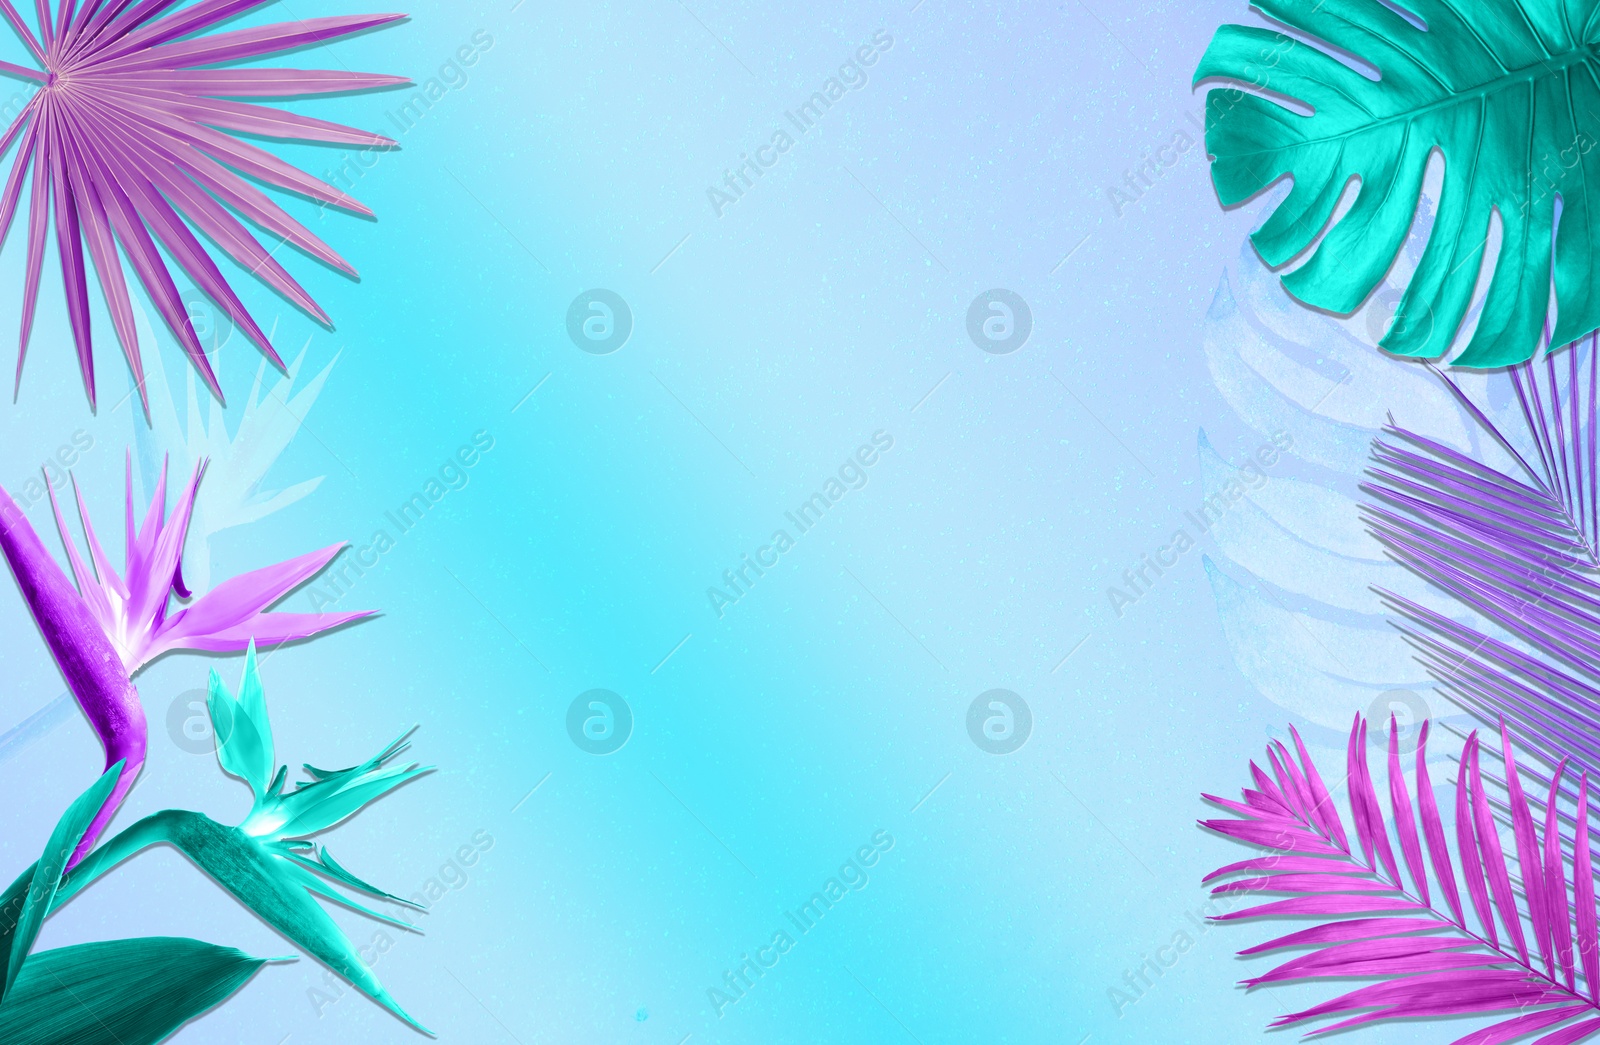 Image of Colorful tropical plants on bright background, flat lay. Creative design